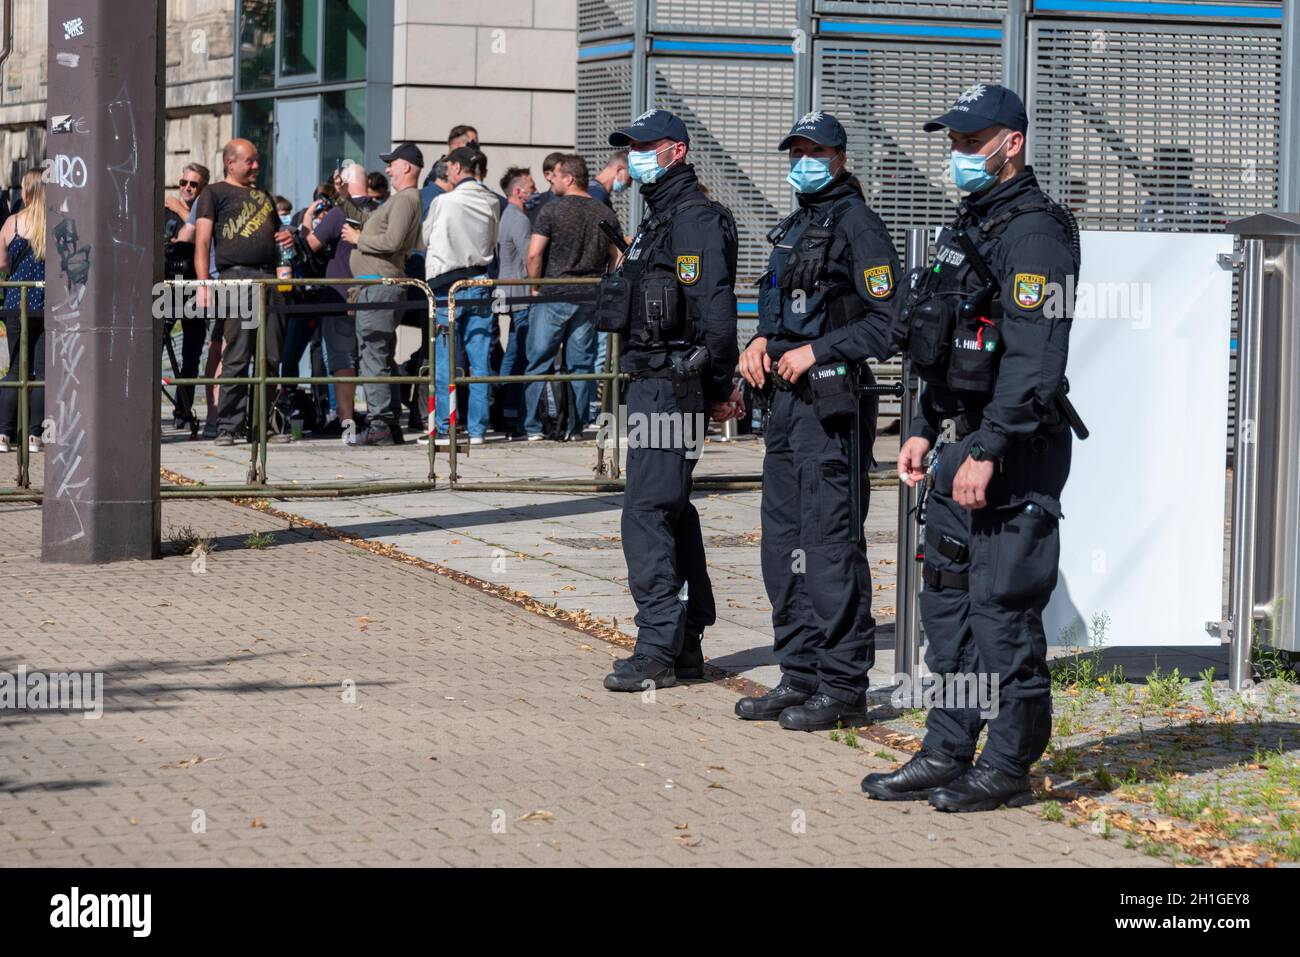 Germany, Saxony-Anhalt, Magdeburg, July 21, 2020: Before the trial of Stephan B., accused of multiple murder, begins, German police officers will stan Stock Photo